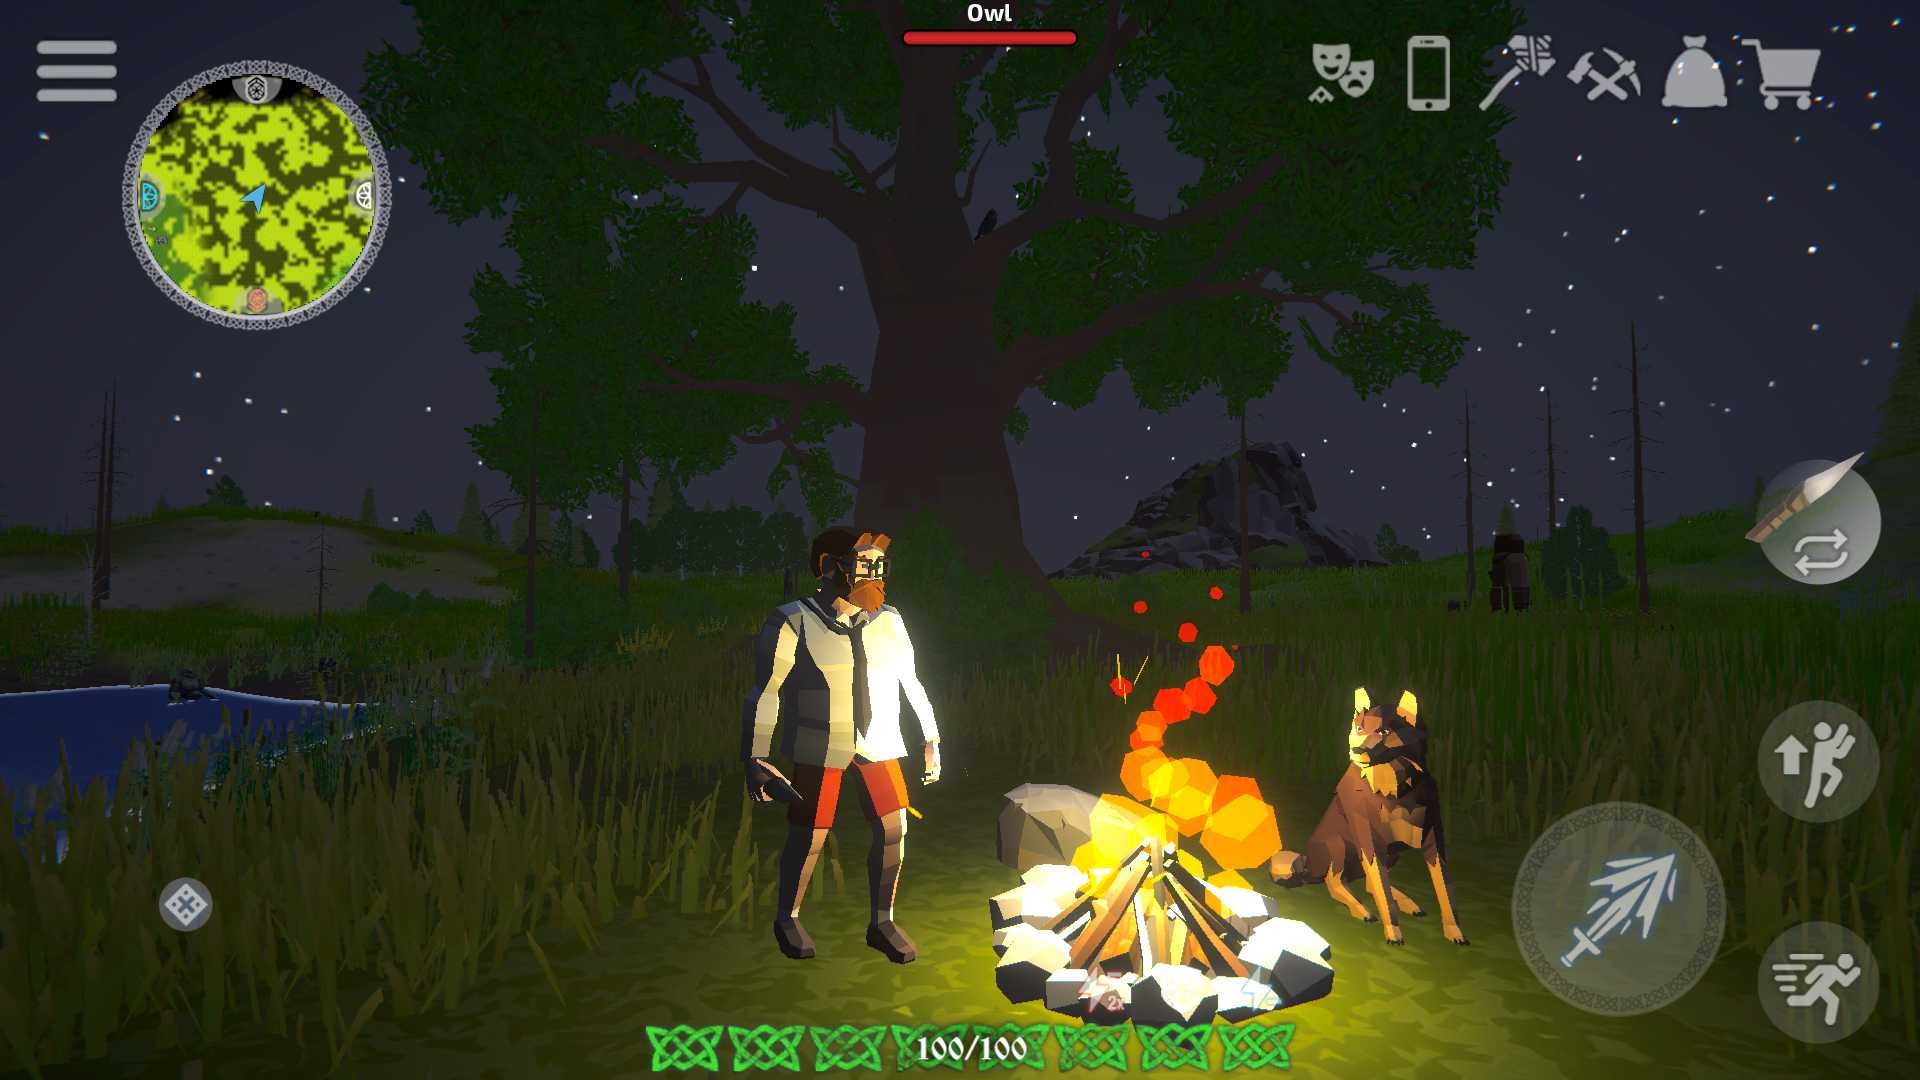 Download Unlucky Tale RPG Survival Android free game.